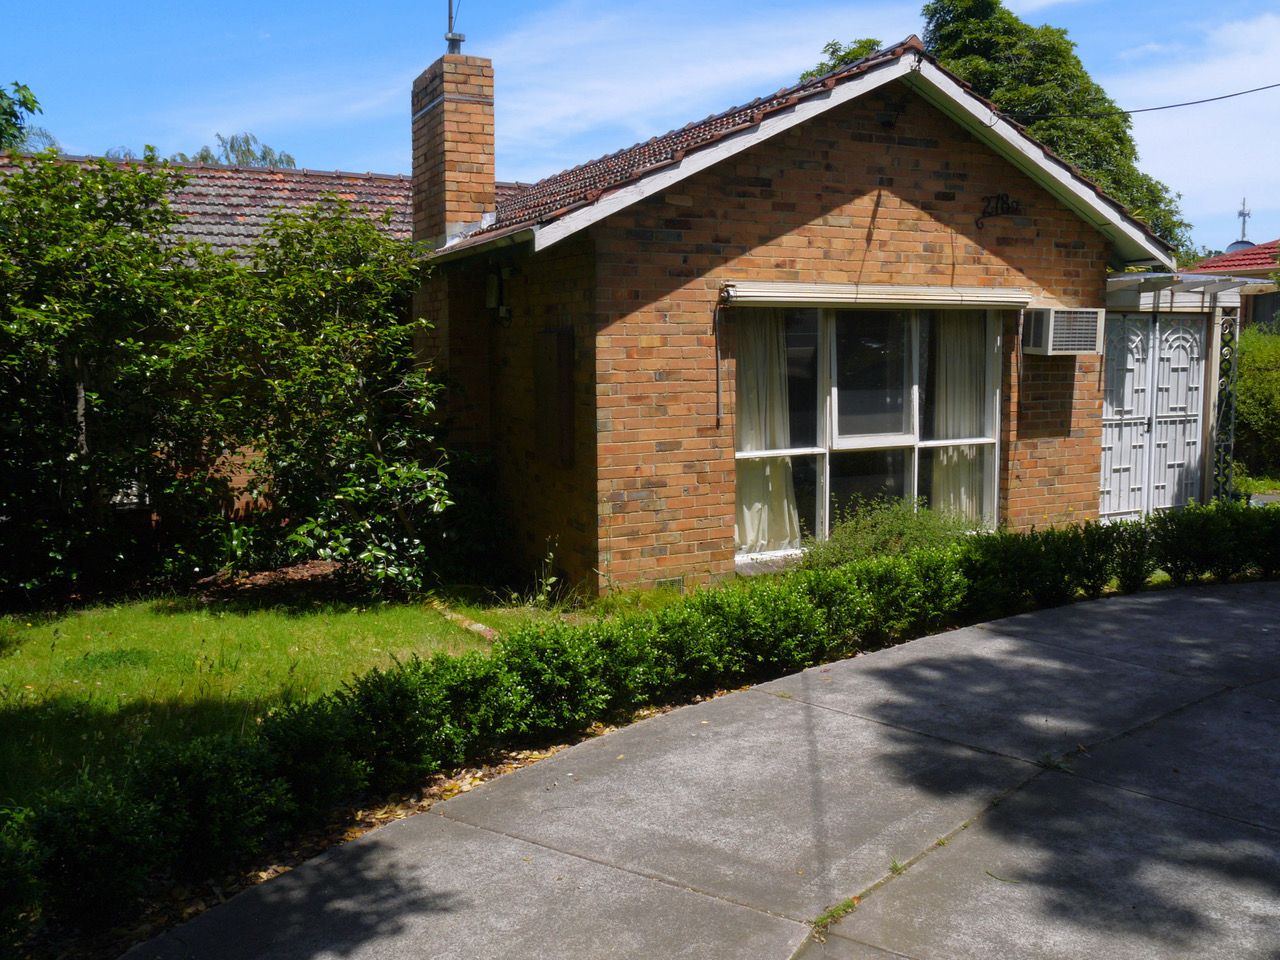 3 bedrooms House in 278 Lower Plenty Road ROSANNA VIC, 3084